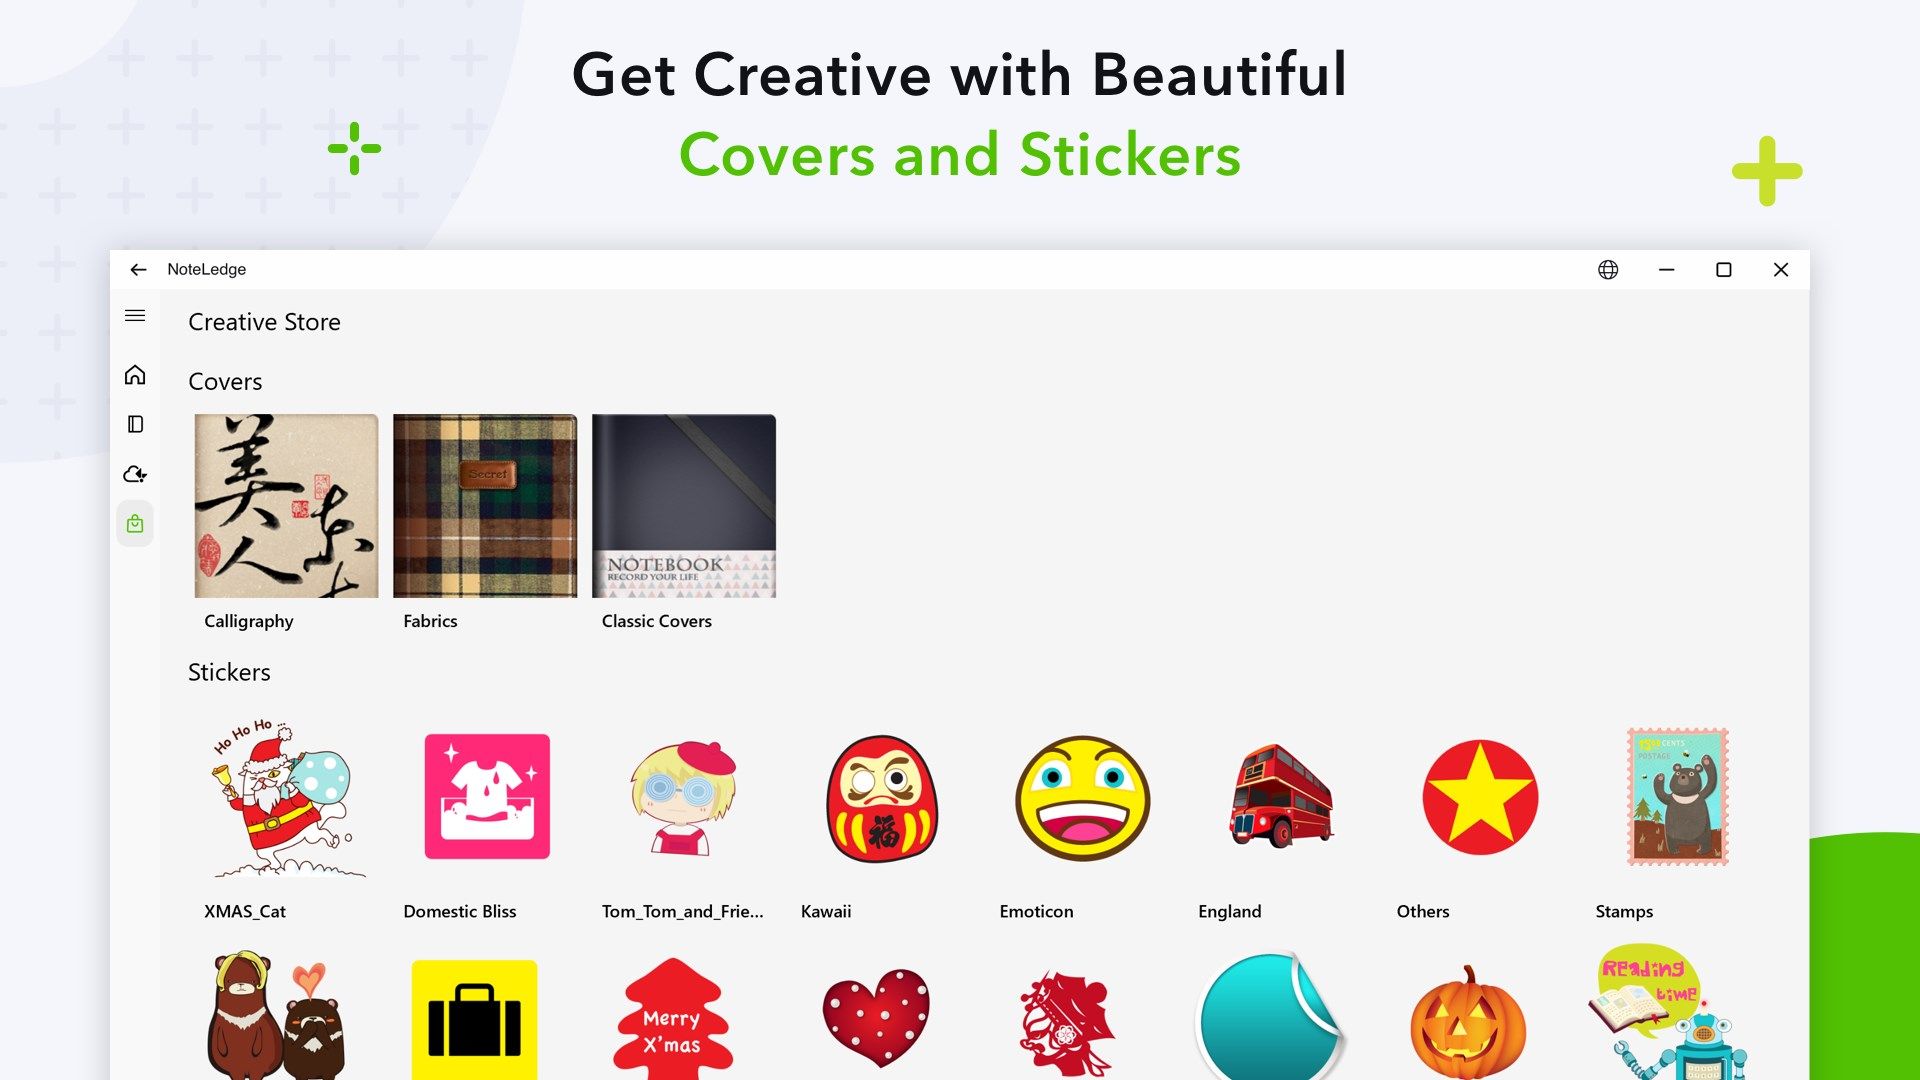 Get Creative with Beautiful Covers and Stickers